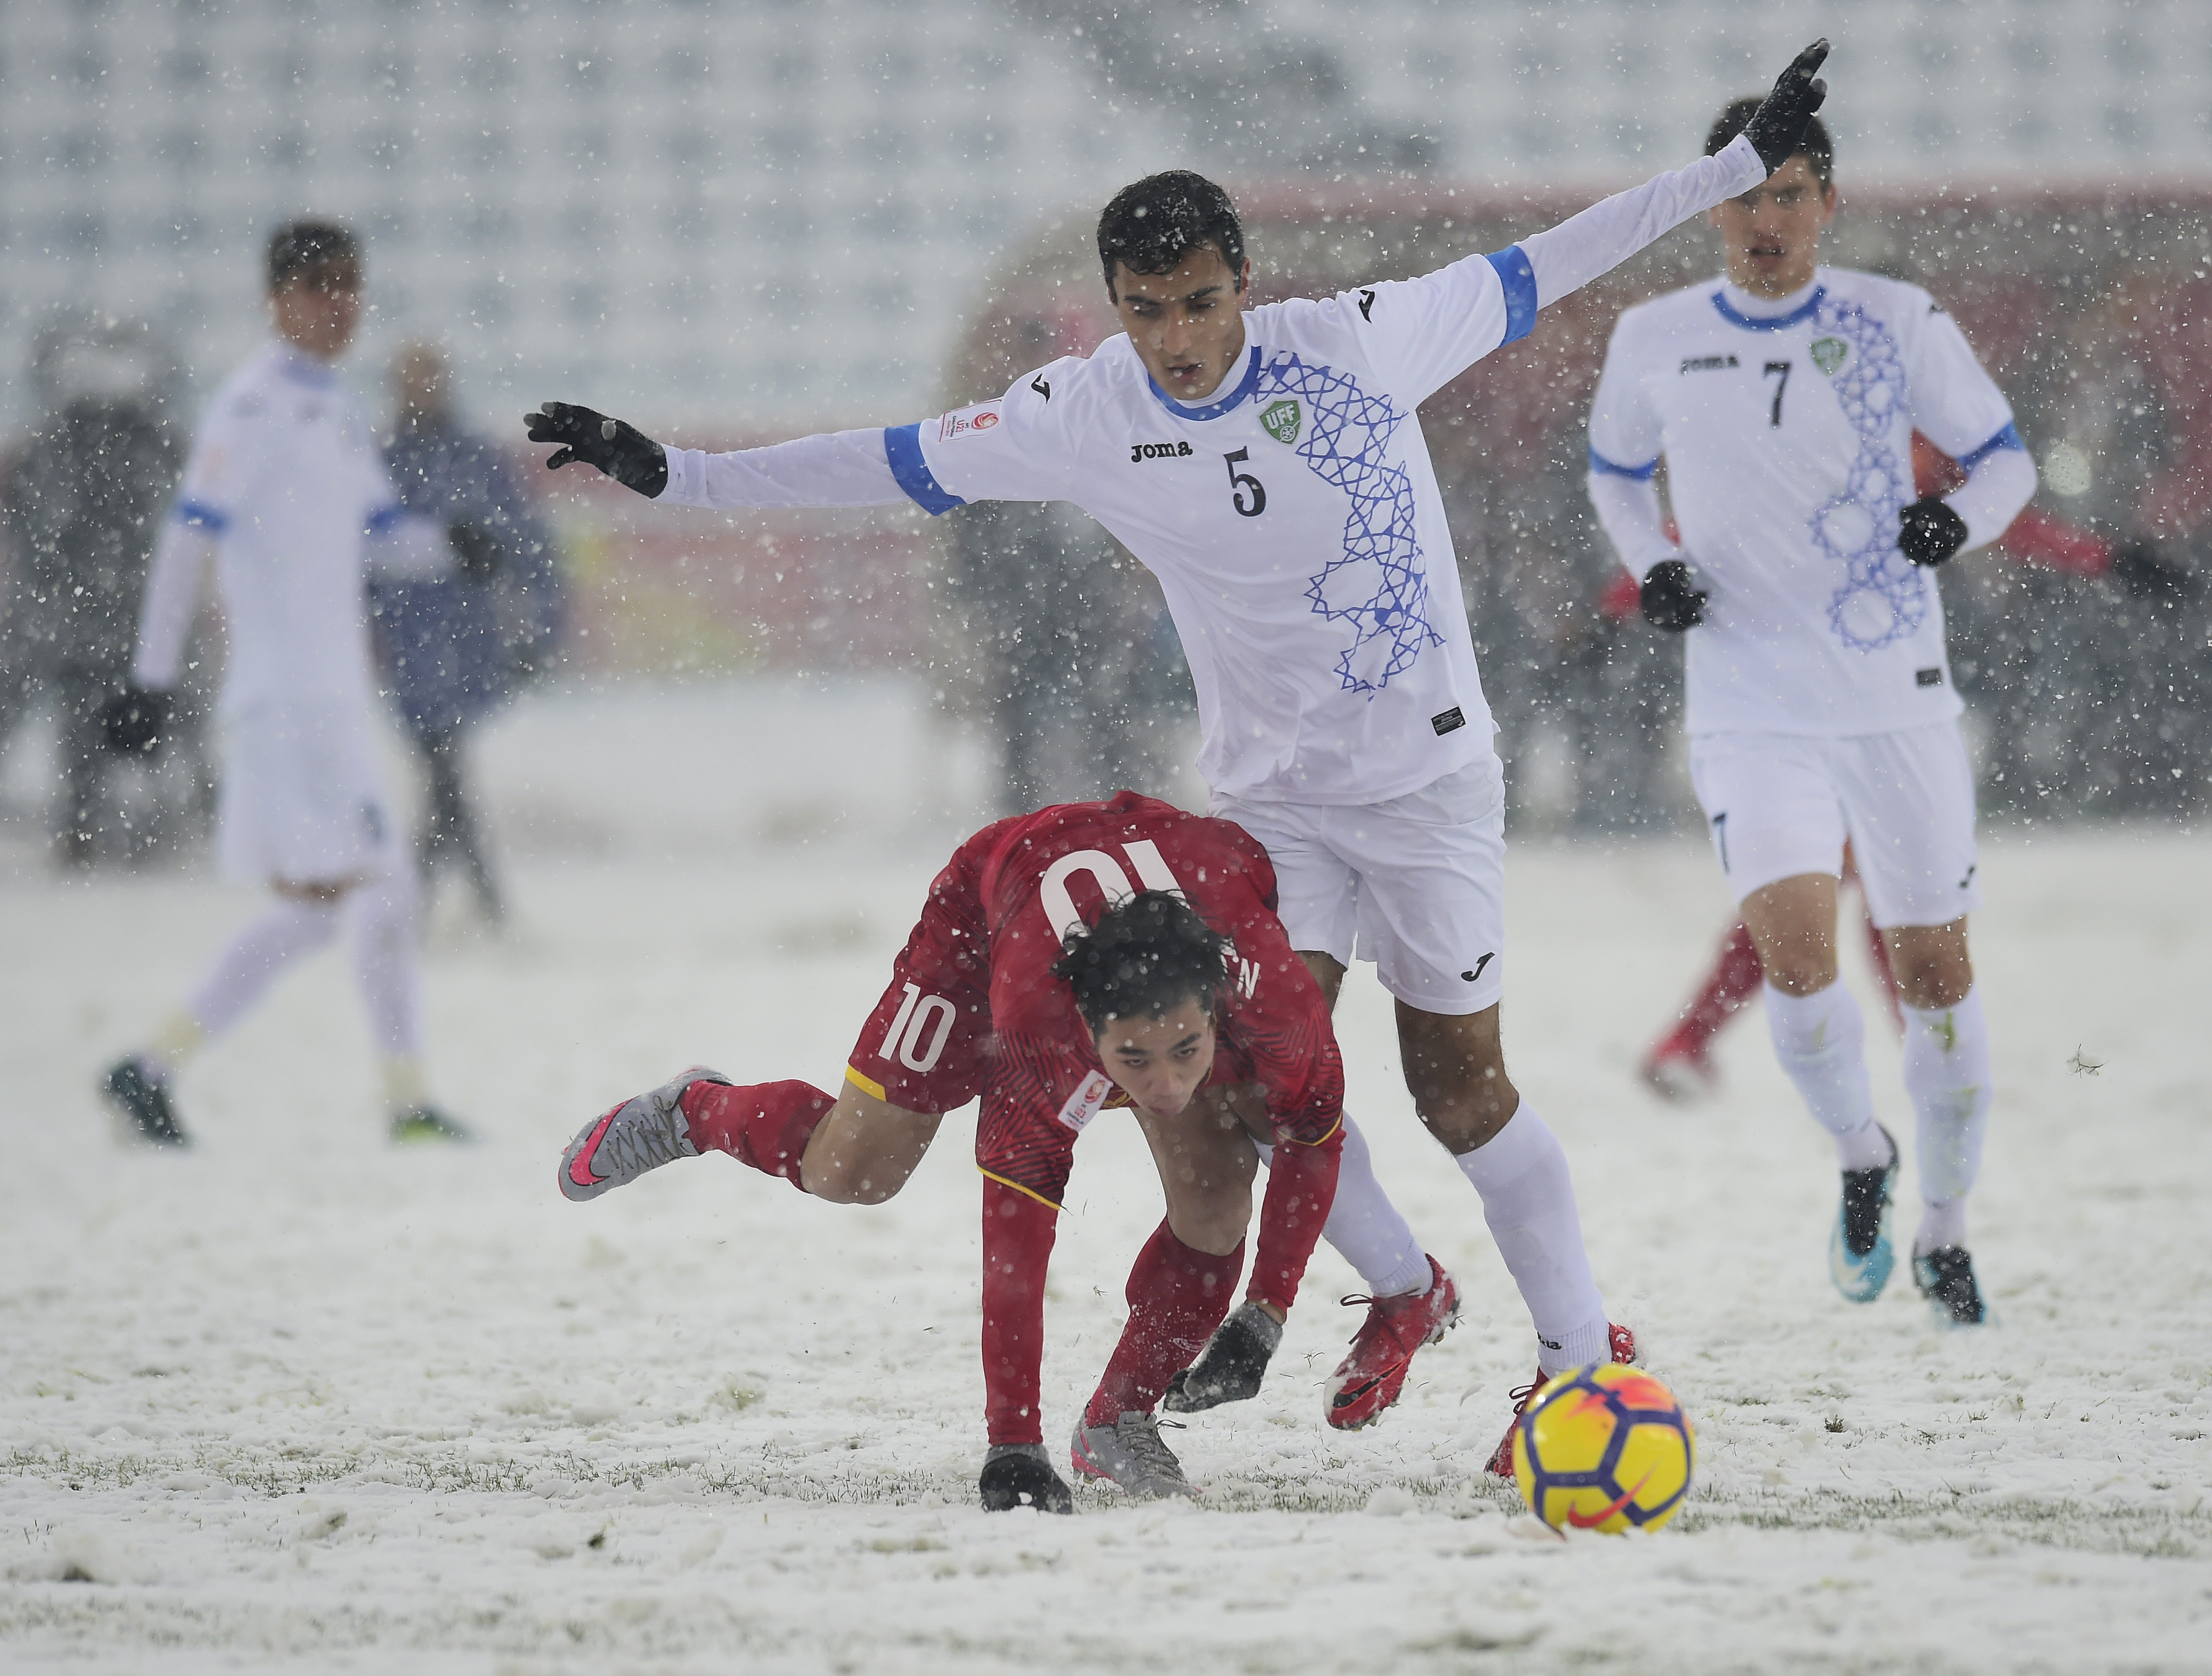 Vietnam's Nguyen Cong Phuong (L) competes for the ball with Uzbekistan's Otakhonov Abbosjon (2nd R) during their AFC Under-23 Championship final football match in Changzhou, in China's eastern Jiangsu province on January 27, 2018. / AFP PHOTO / - / China OUT